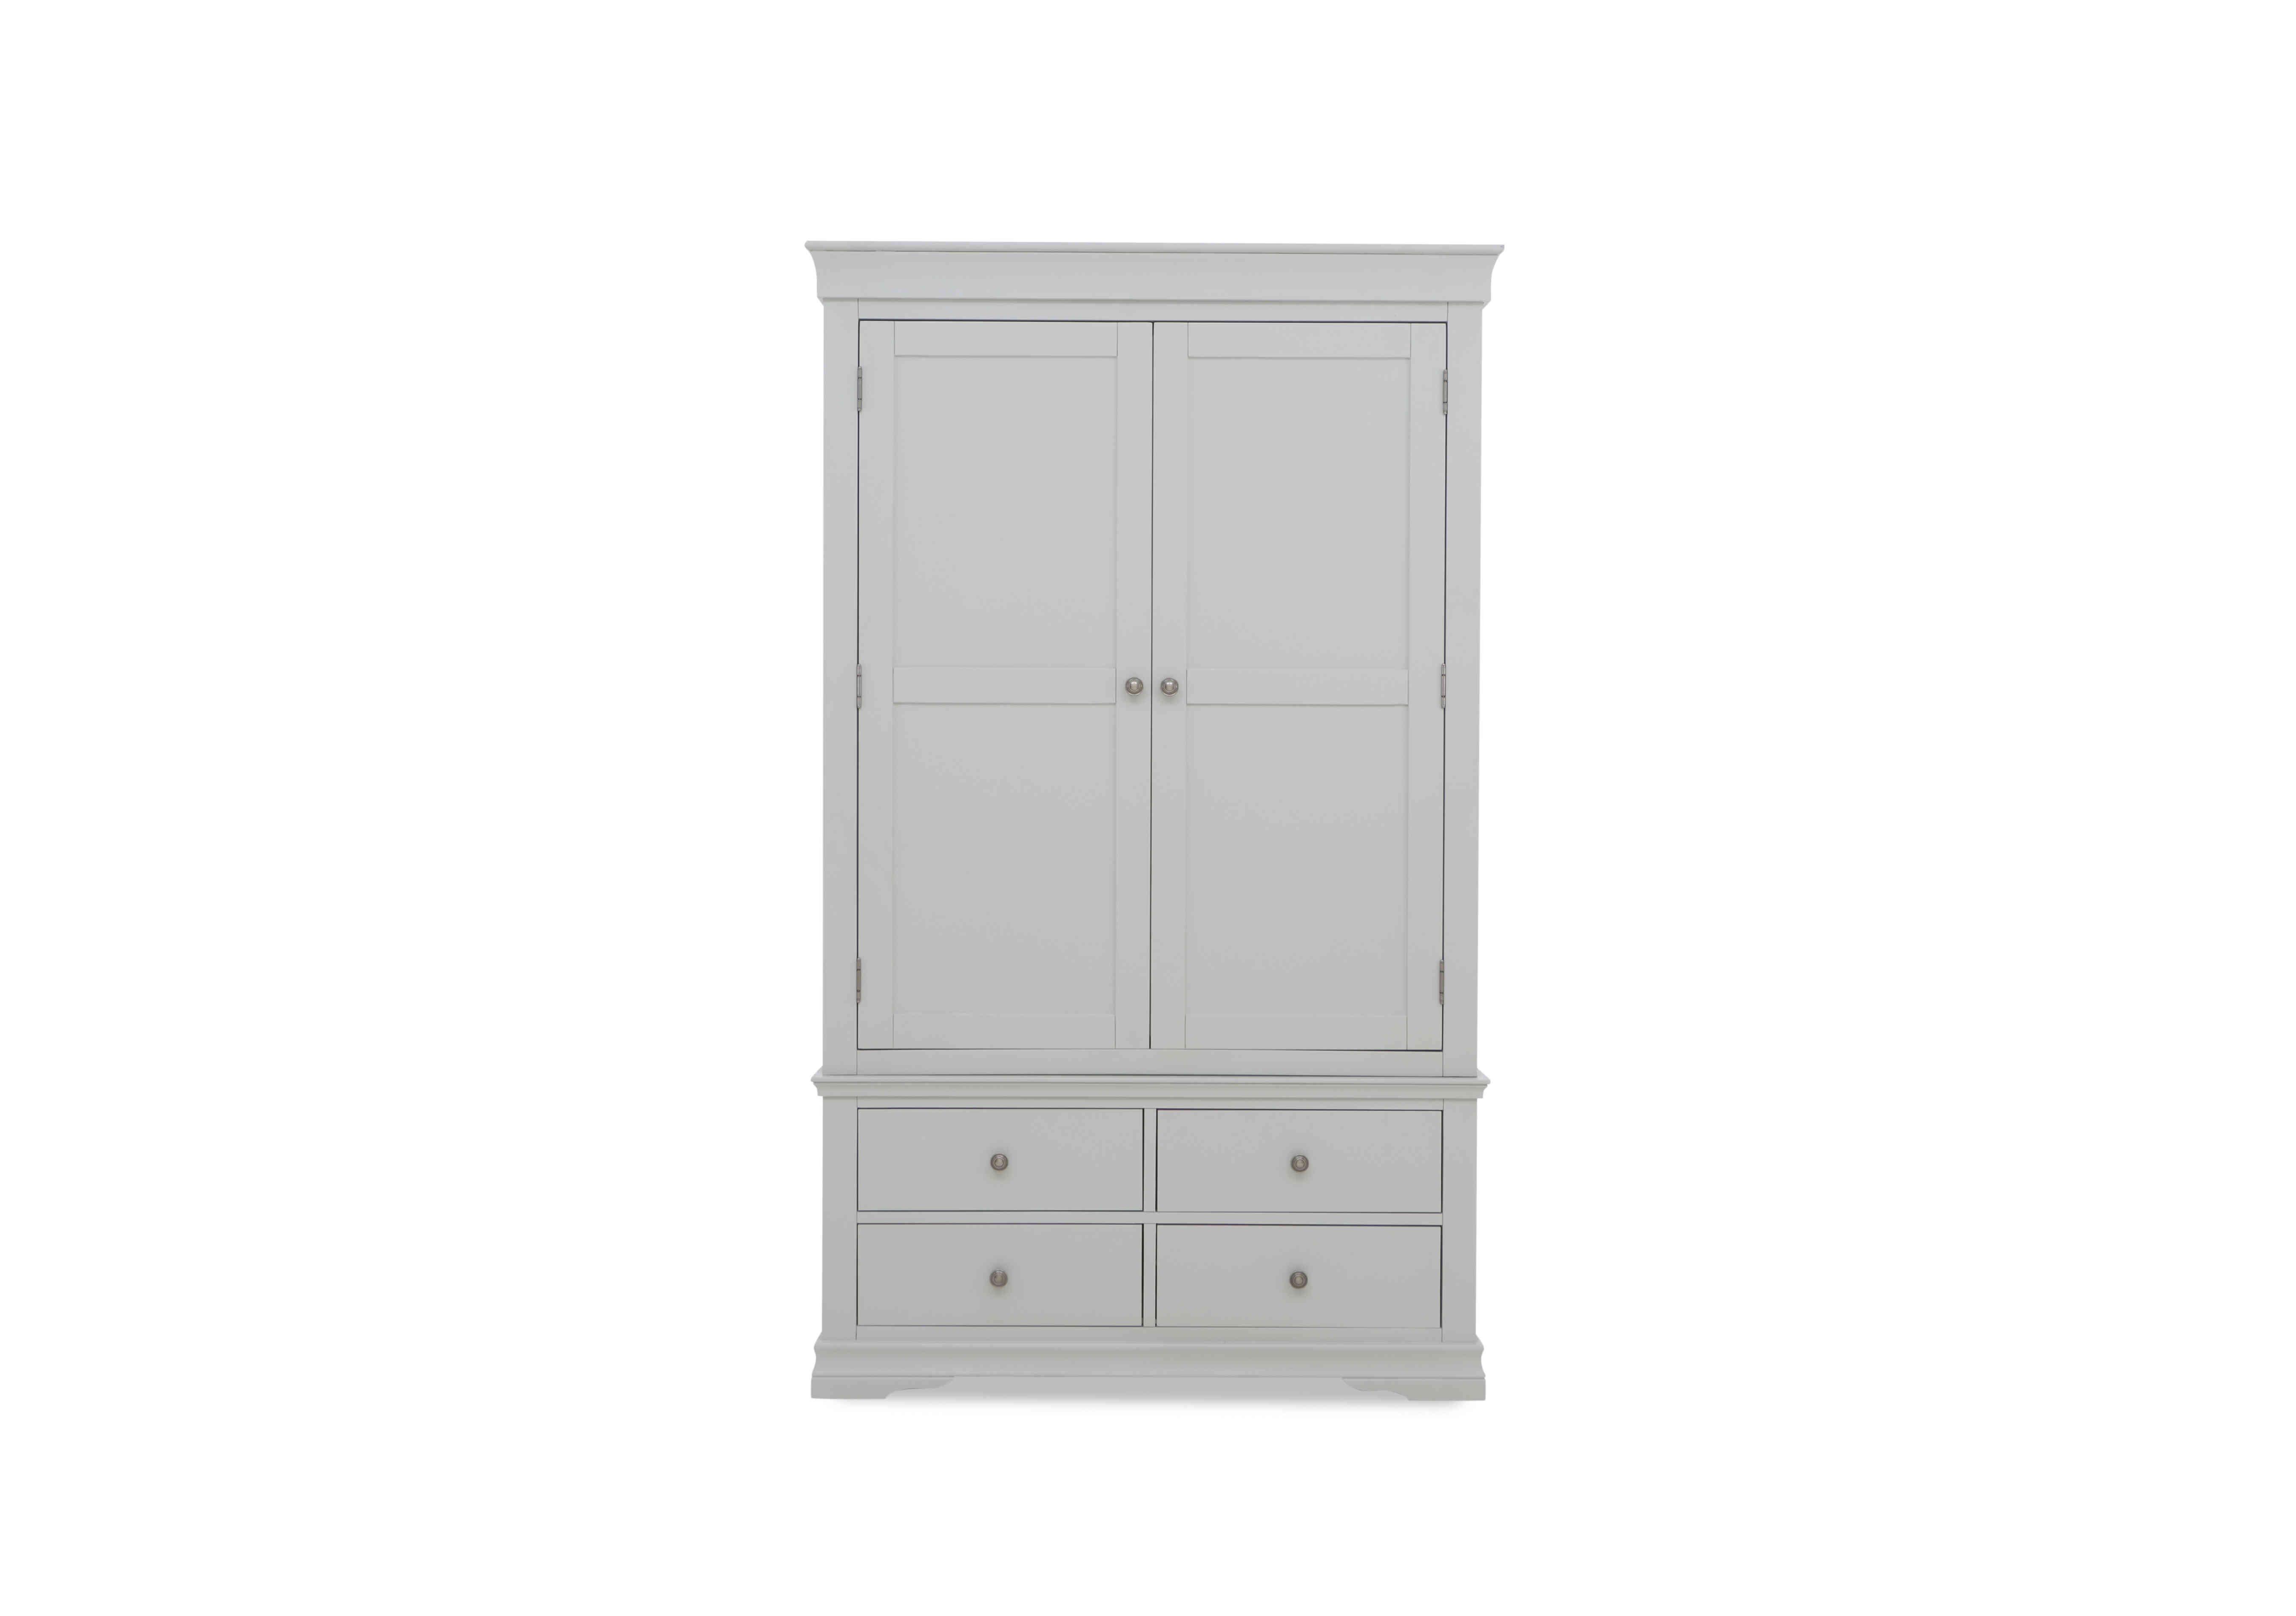 Tiverton 2 Door Gents Wardrobe with Drawers in Dove Grey on Furniture Village